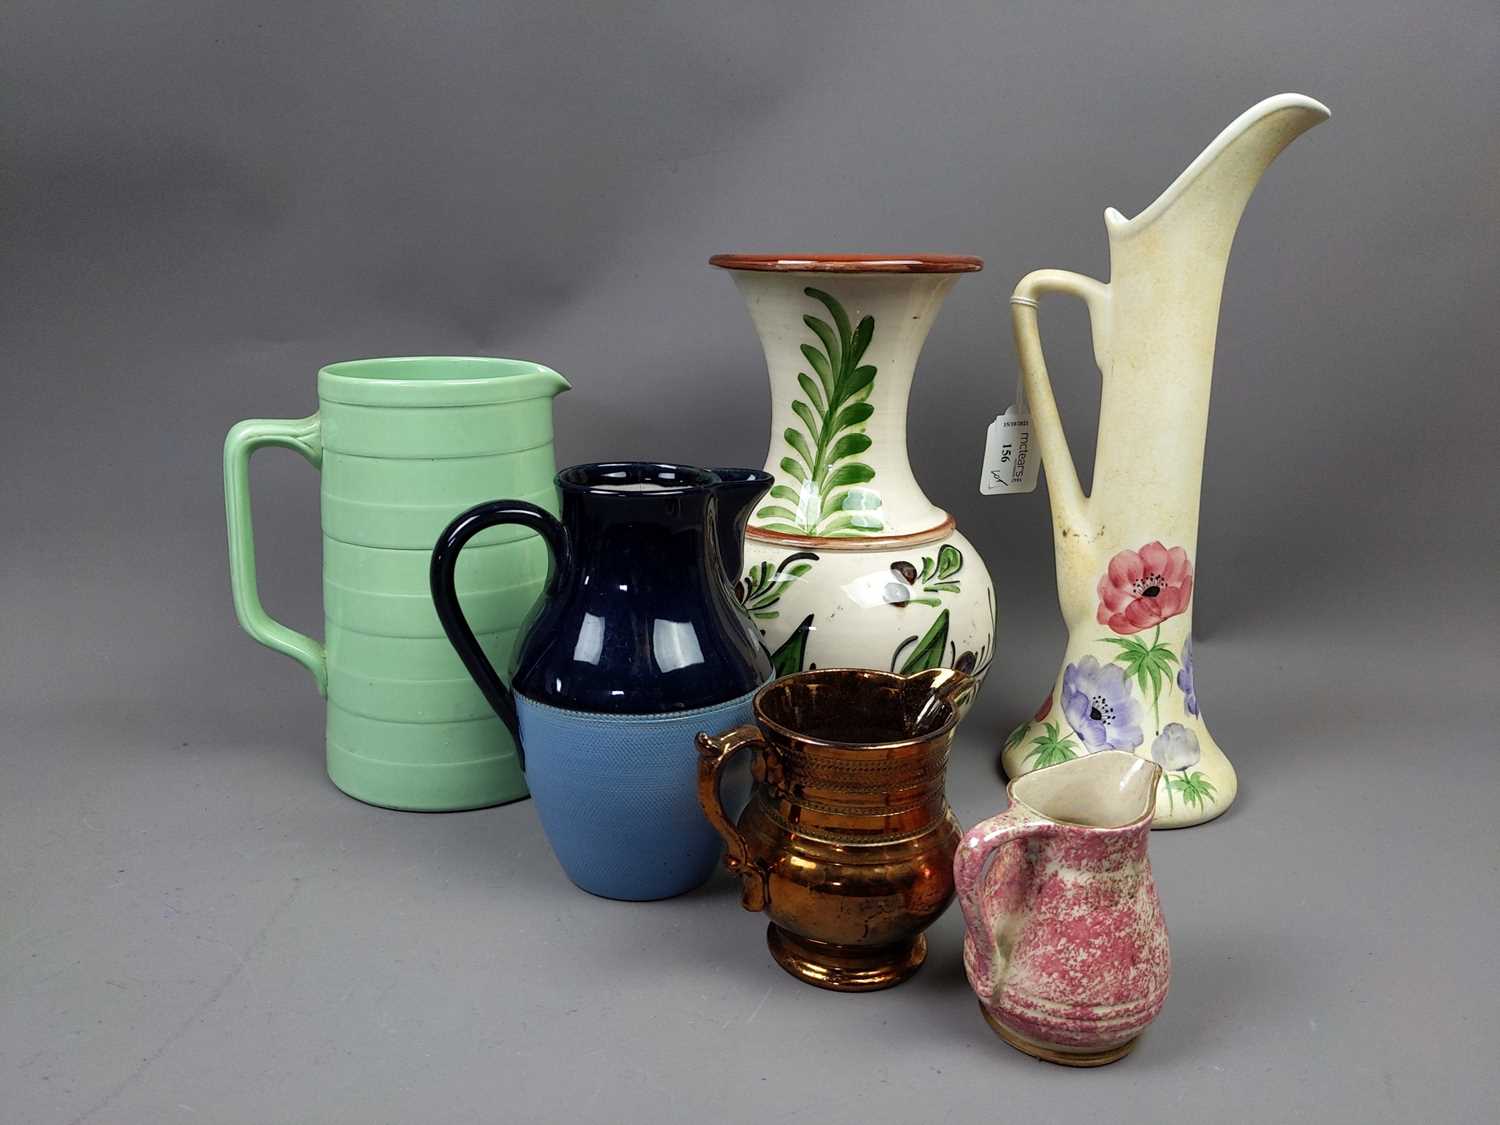 Lot 156 - A RADFORD POTTERY JUG ALONG WITH OTHER CERAMICS